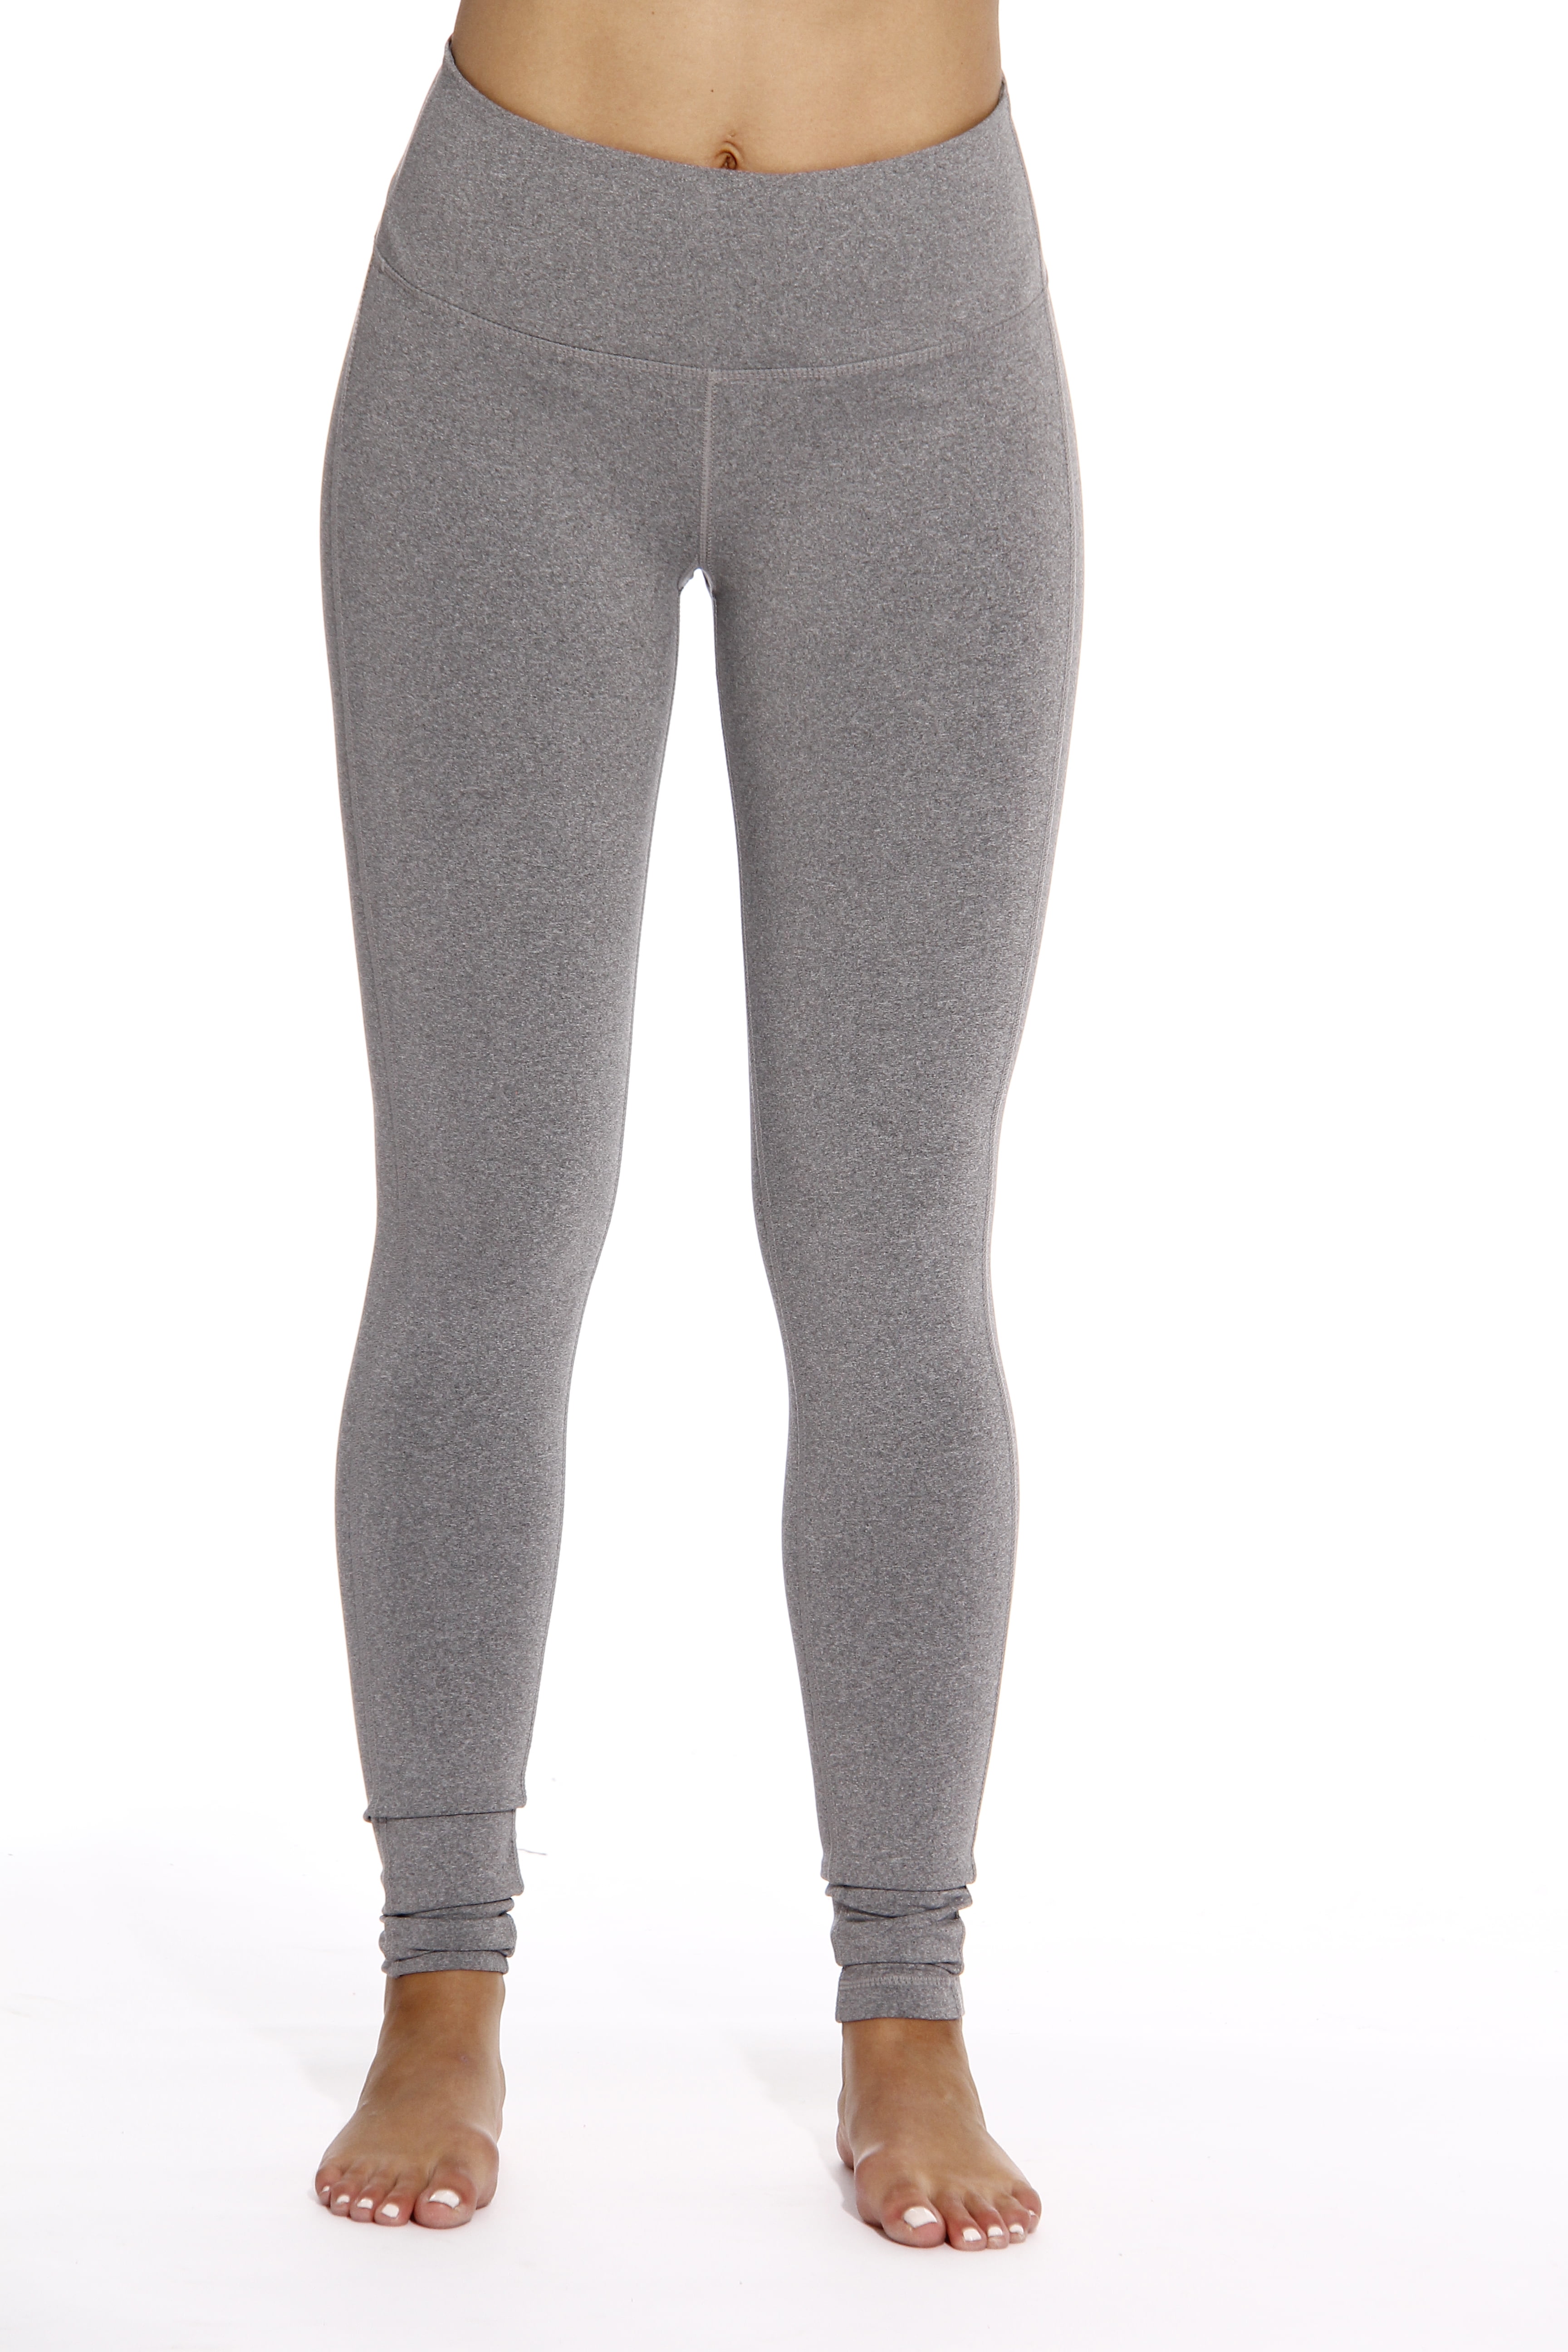 Yoga Pants for Women - Full Length with hidden pocket (Heather Grey, Small)  